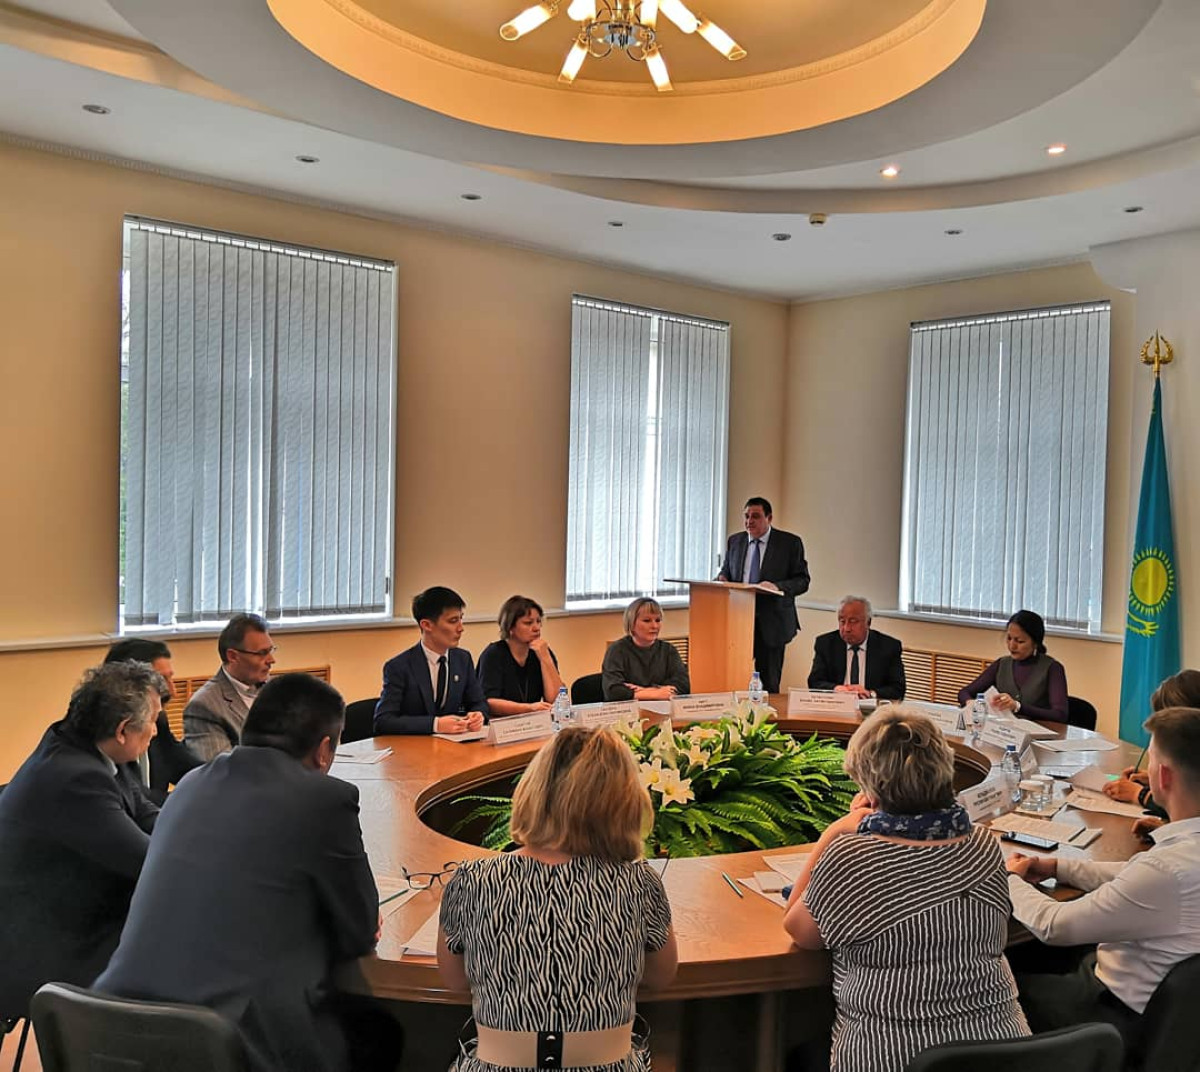 Council of Public Consent of APK NKR considered the issues of Kazakhstanis’ growing welfare